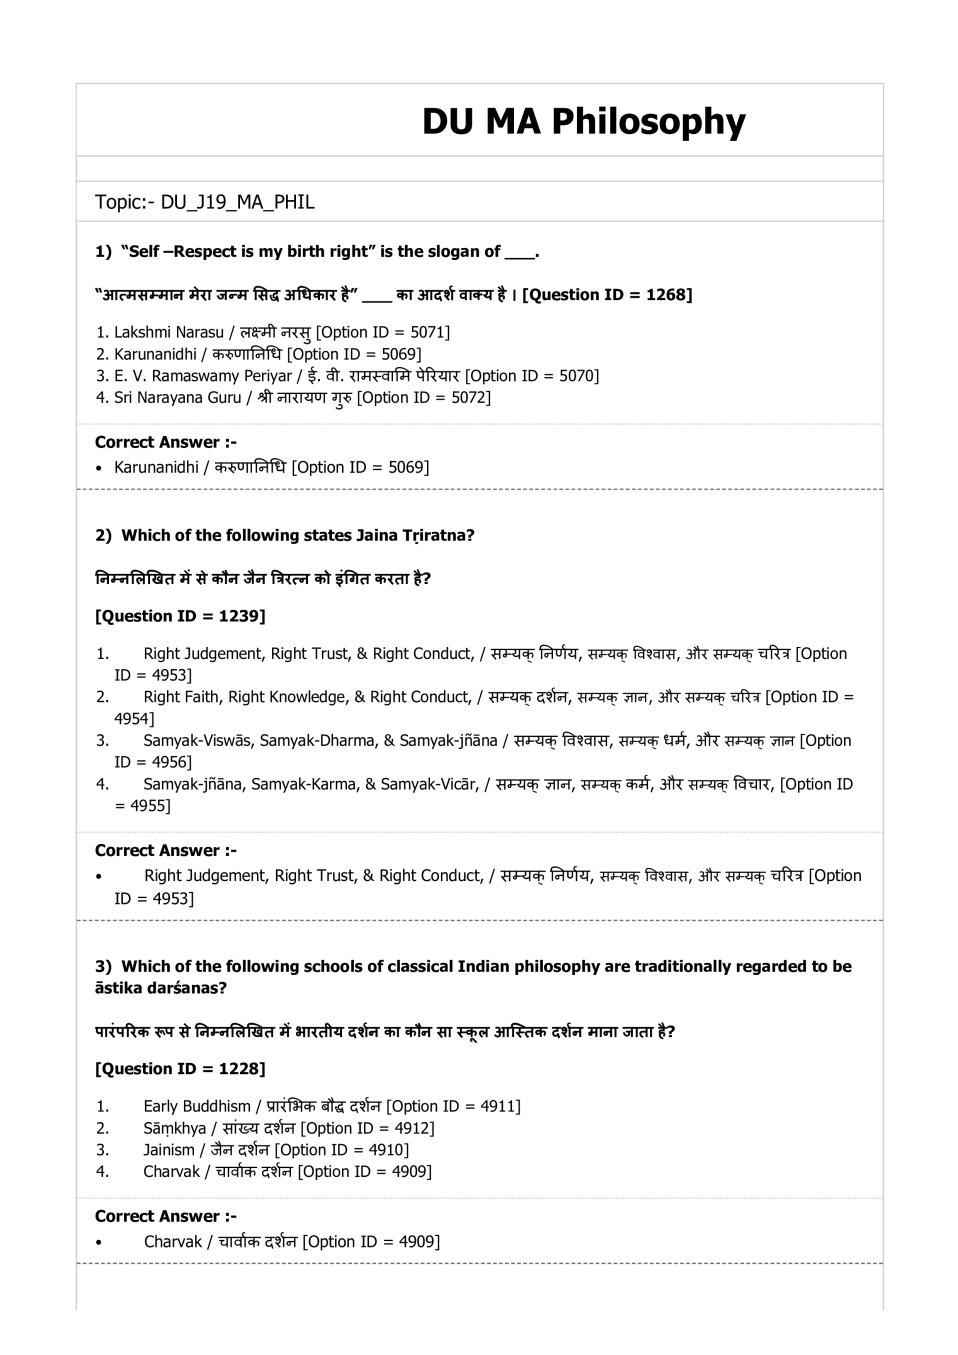 DUET Question Paper 2019 for MA Philosophy - Page 1